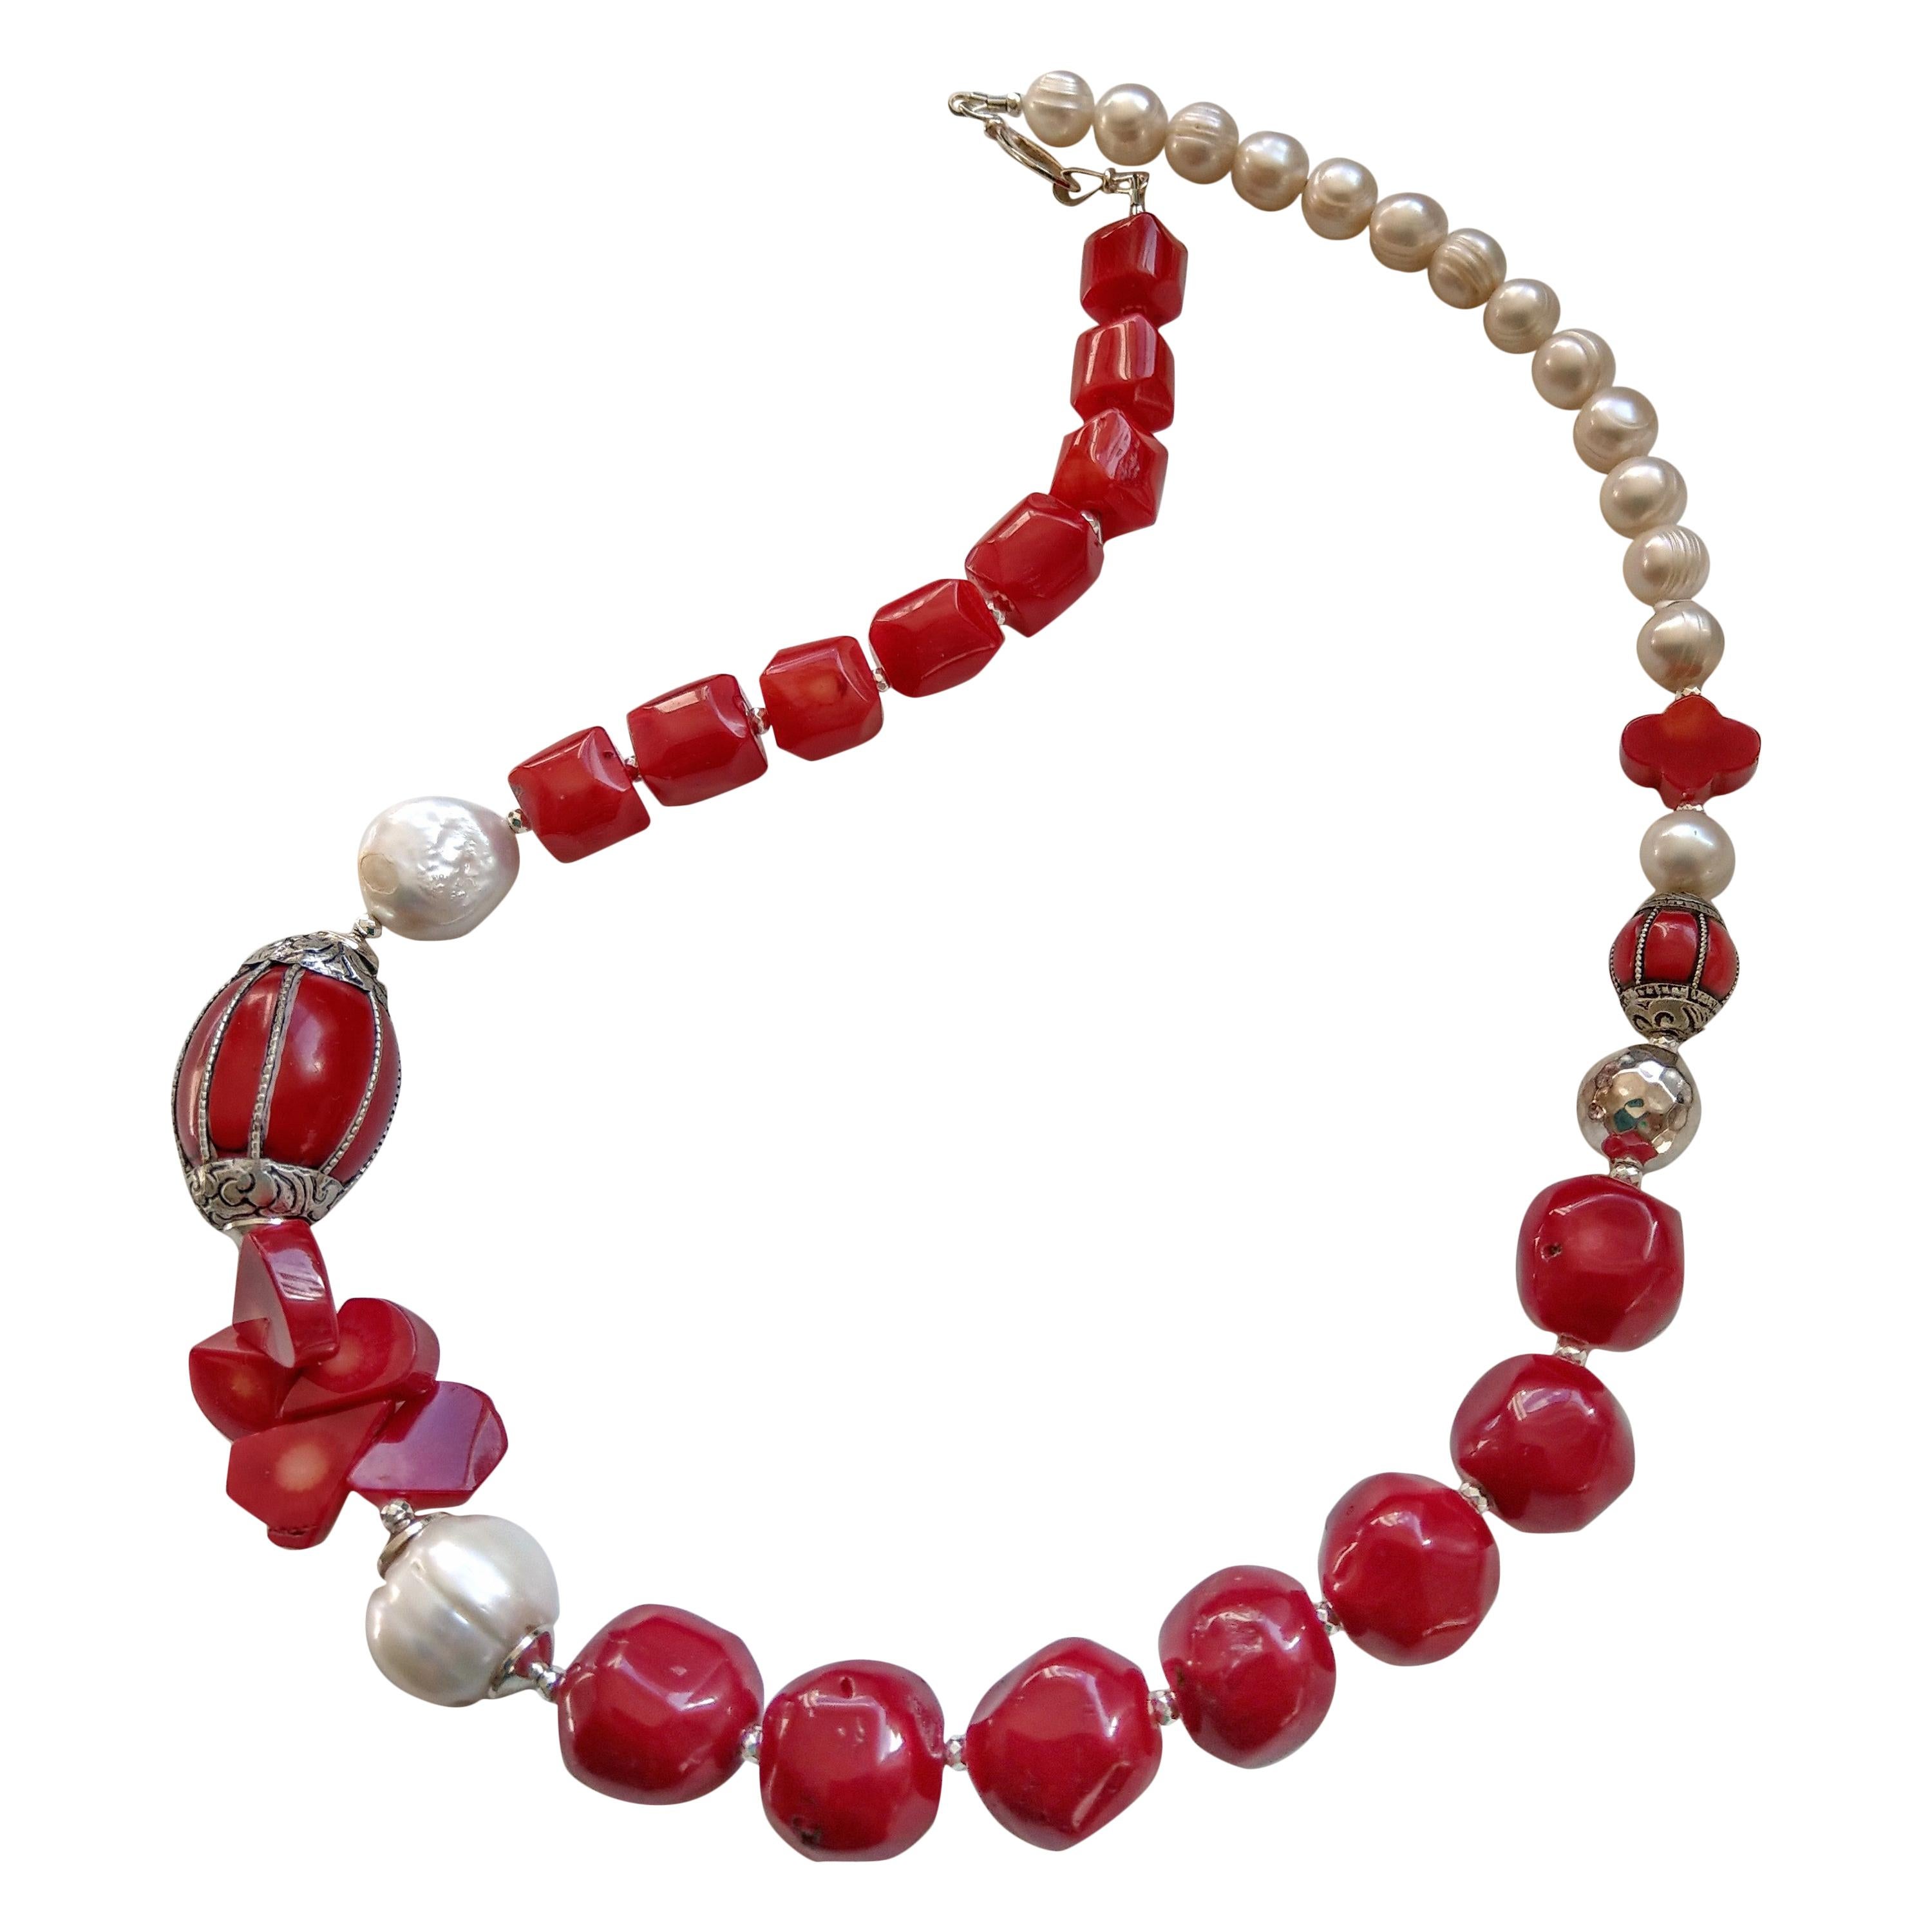 Fit for Summer this statement Red Sea Bamboo Coral and natural Freshwater Pearl Necklace can be worn day or night.
necklace features a 22mm Gold plate Brass fresh water Pearl set bead
2 large Baroque Fresh Water Pearls 16mm and 17mm.
Red Sea Bamboo